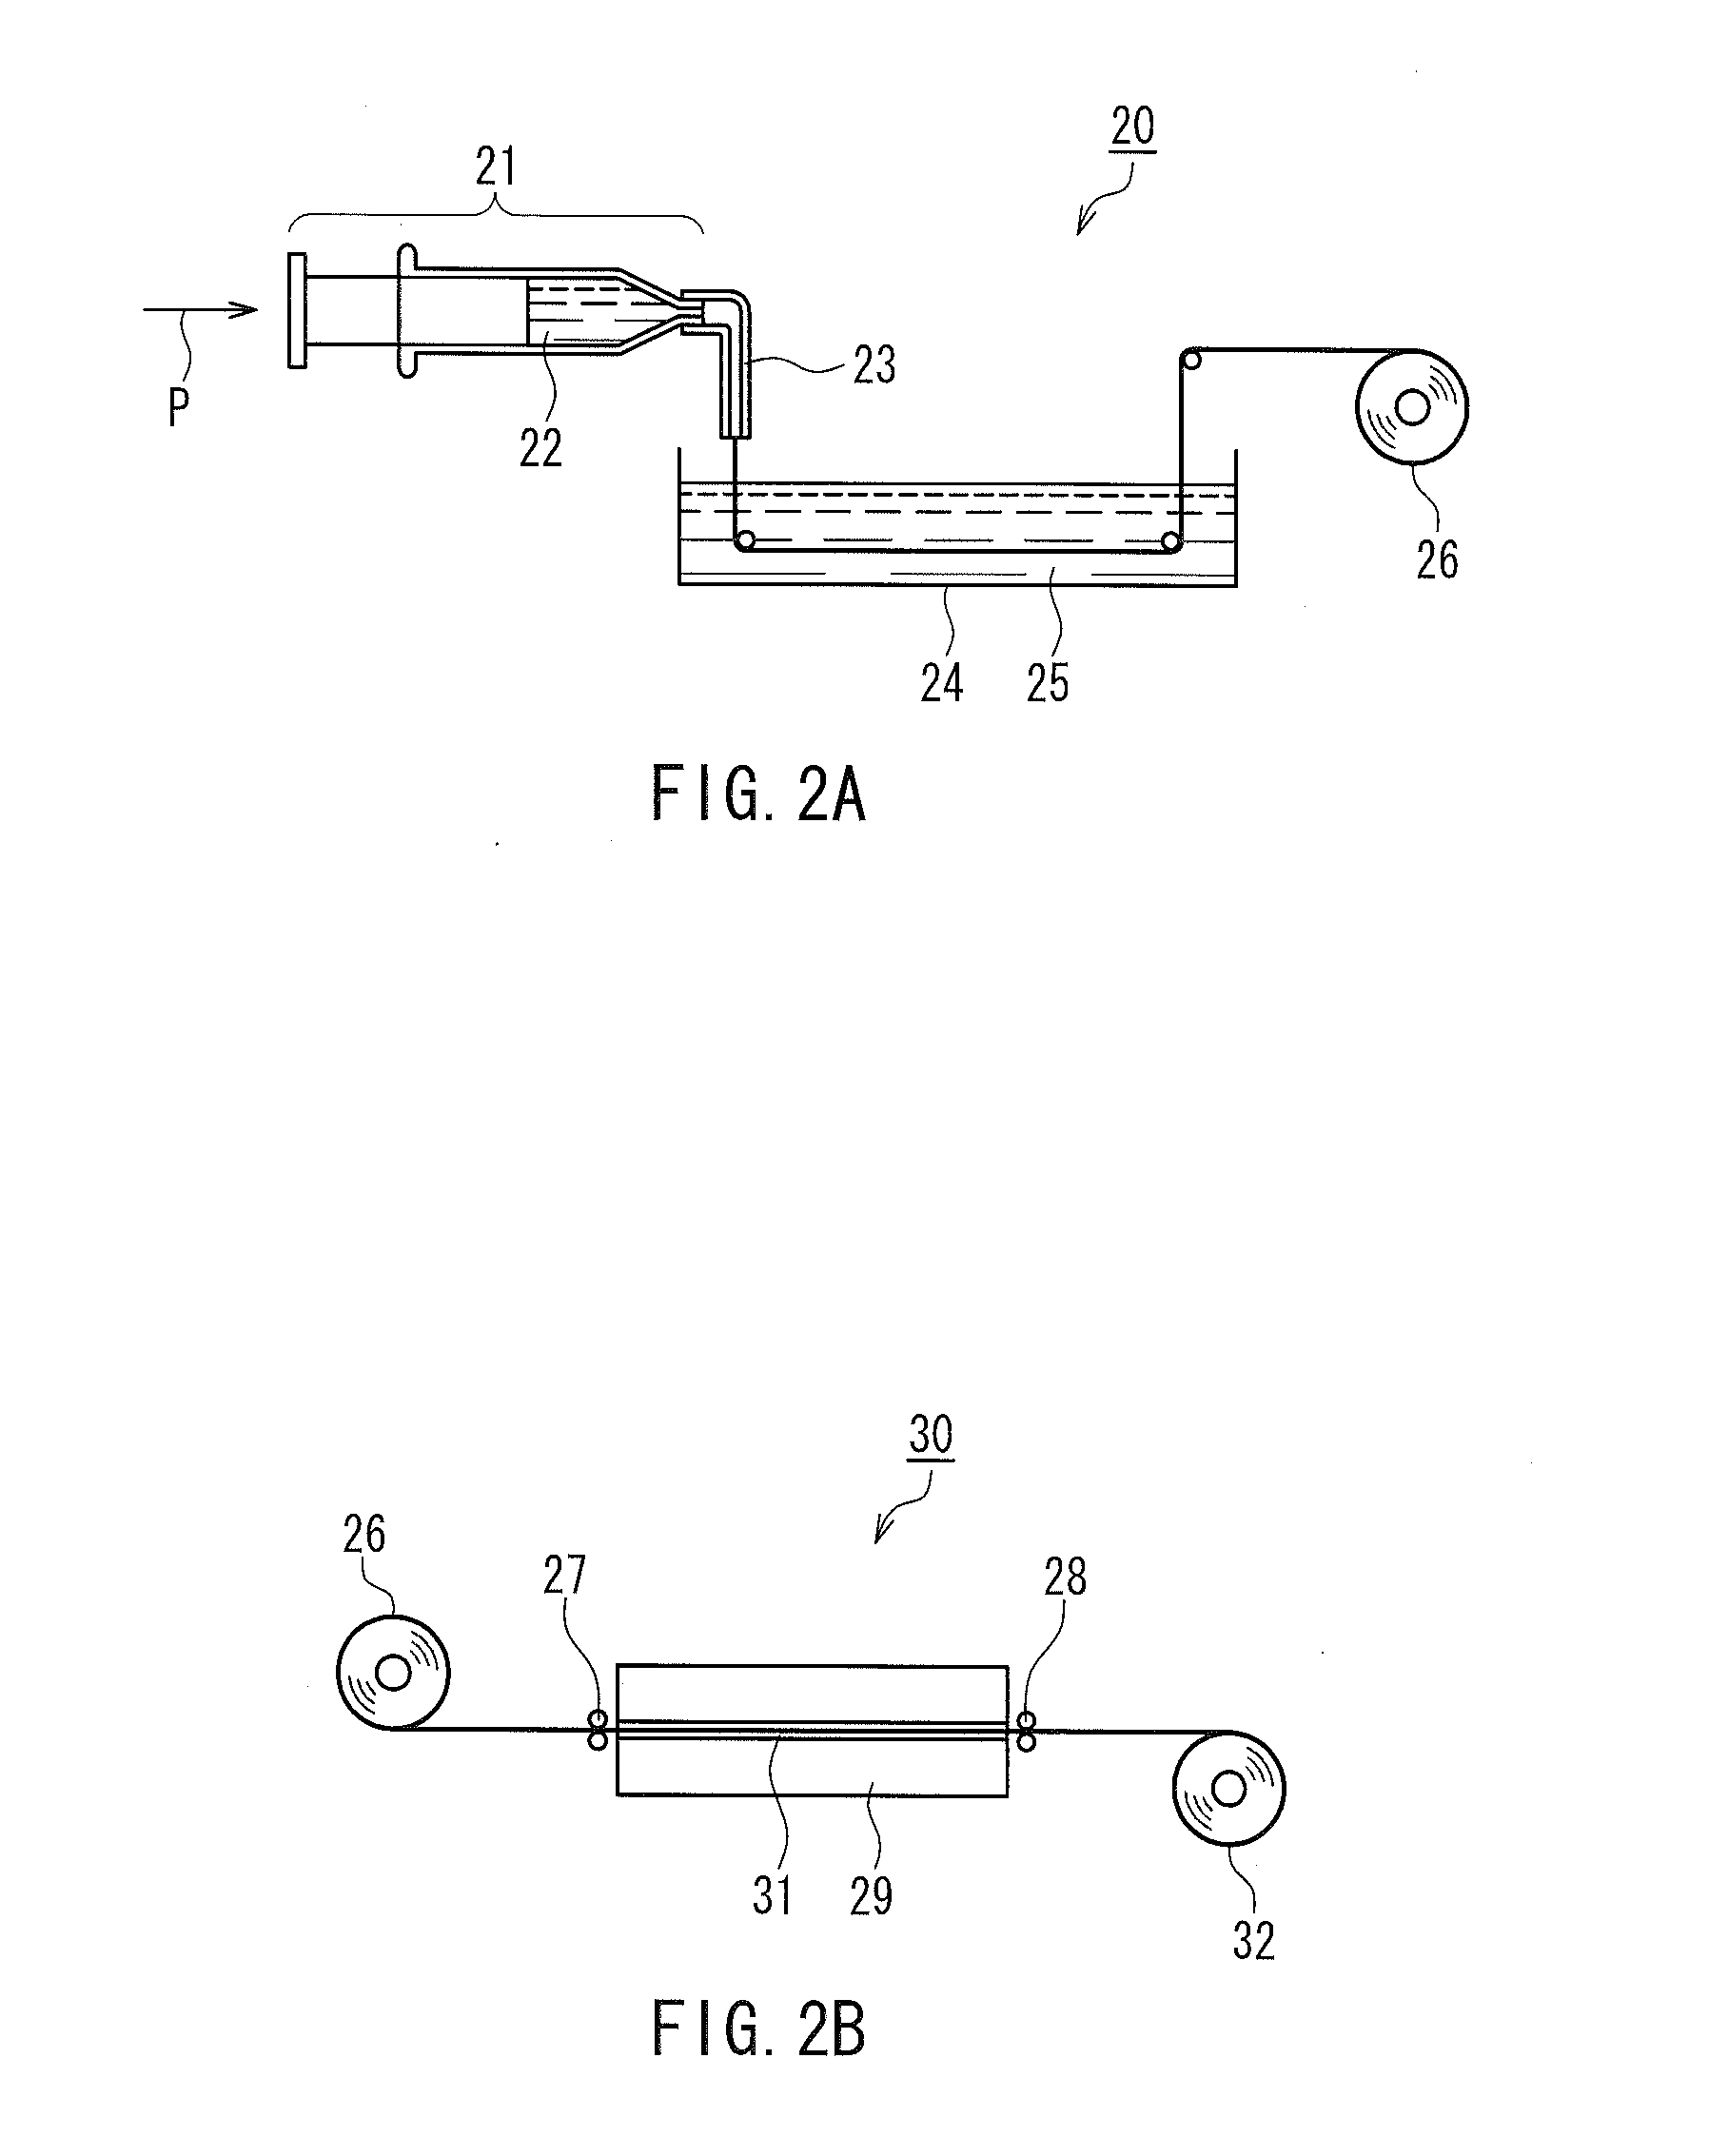 Solution-dyed protein fiber and method for producing same